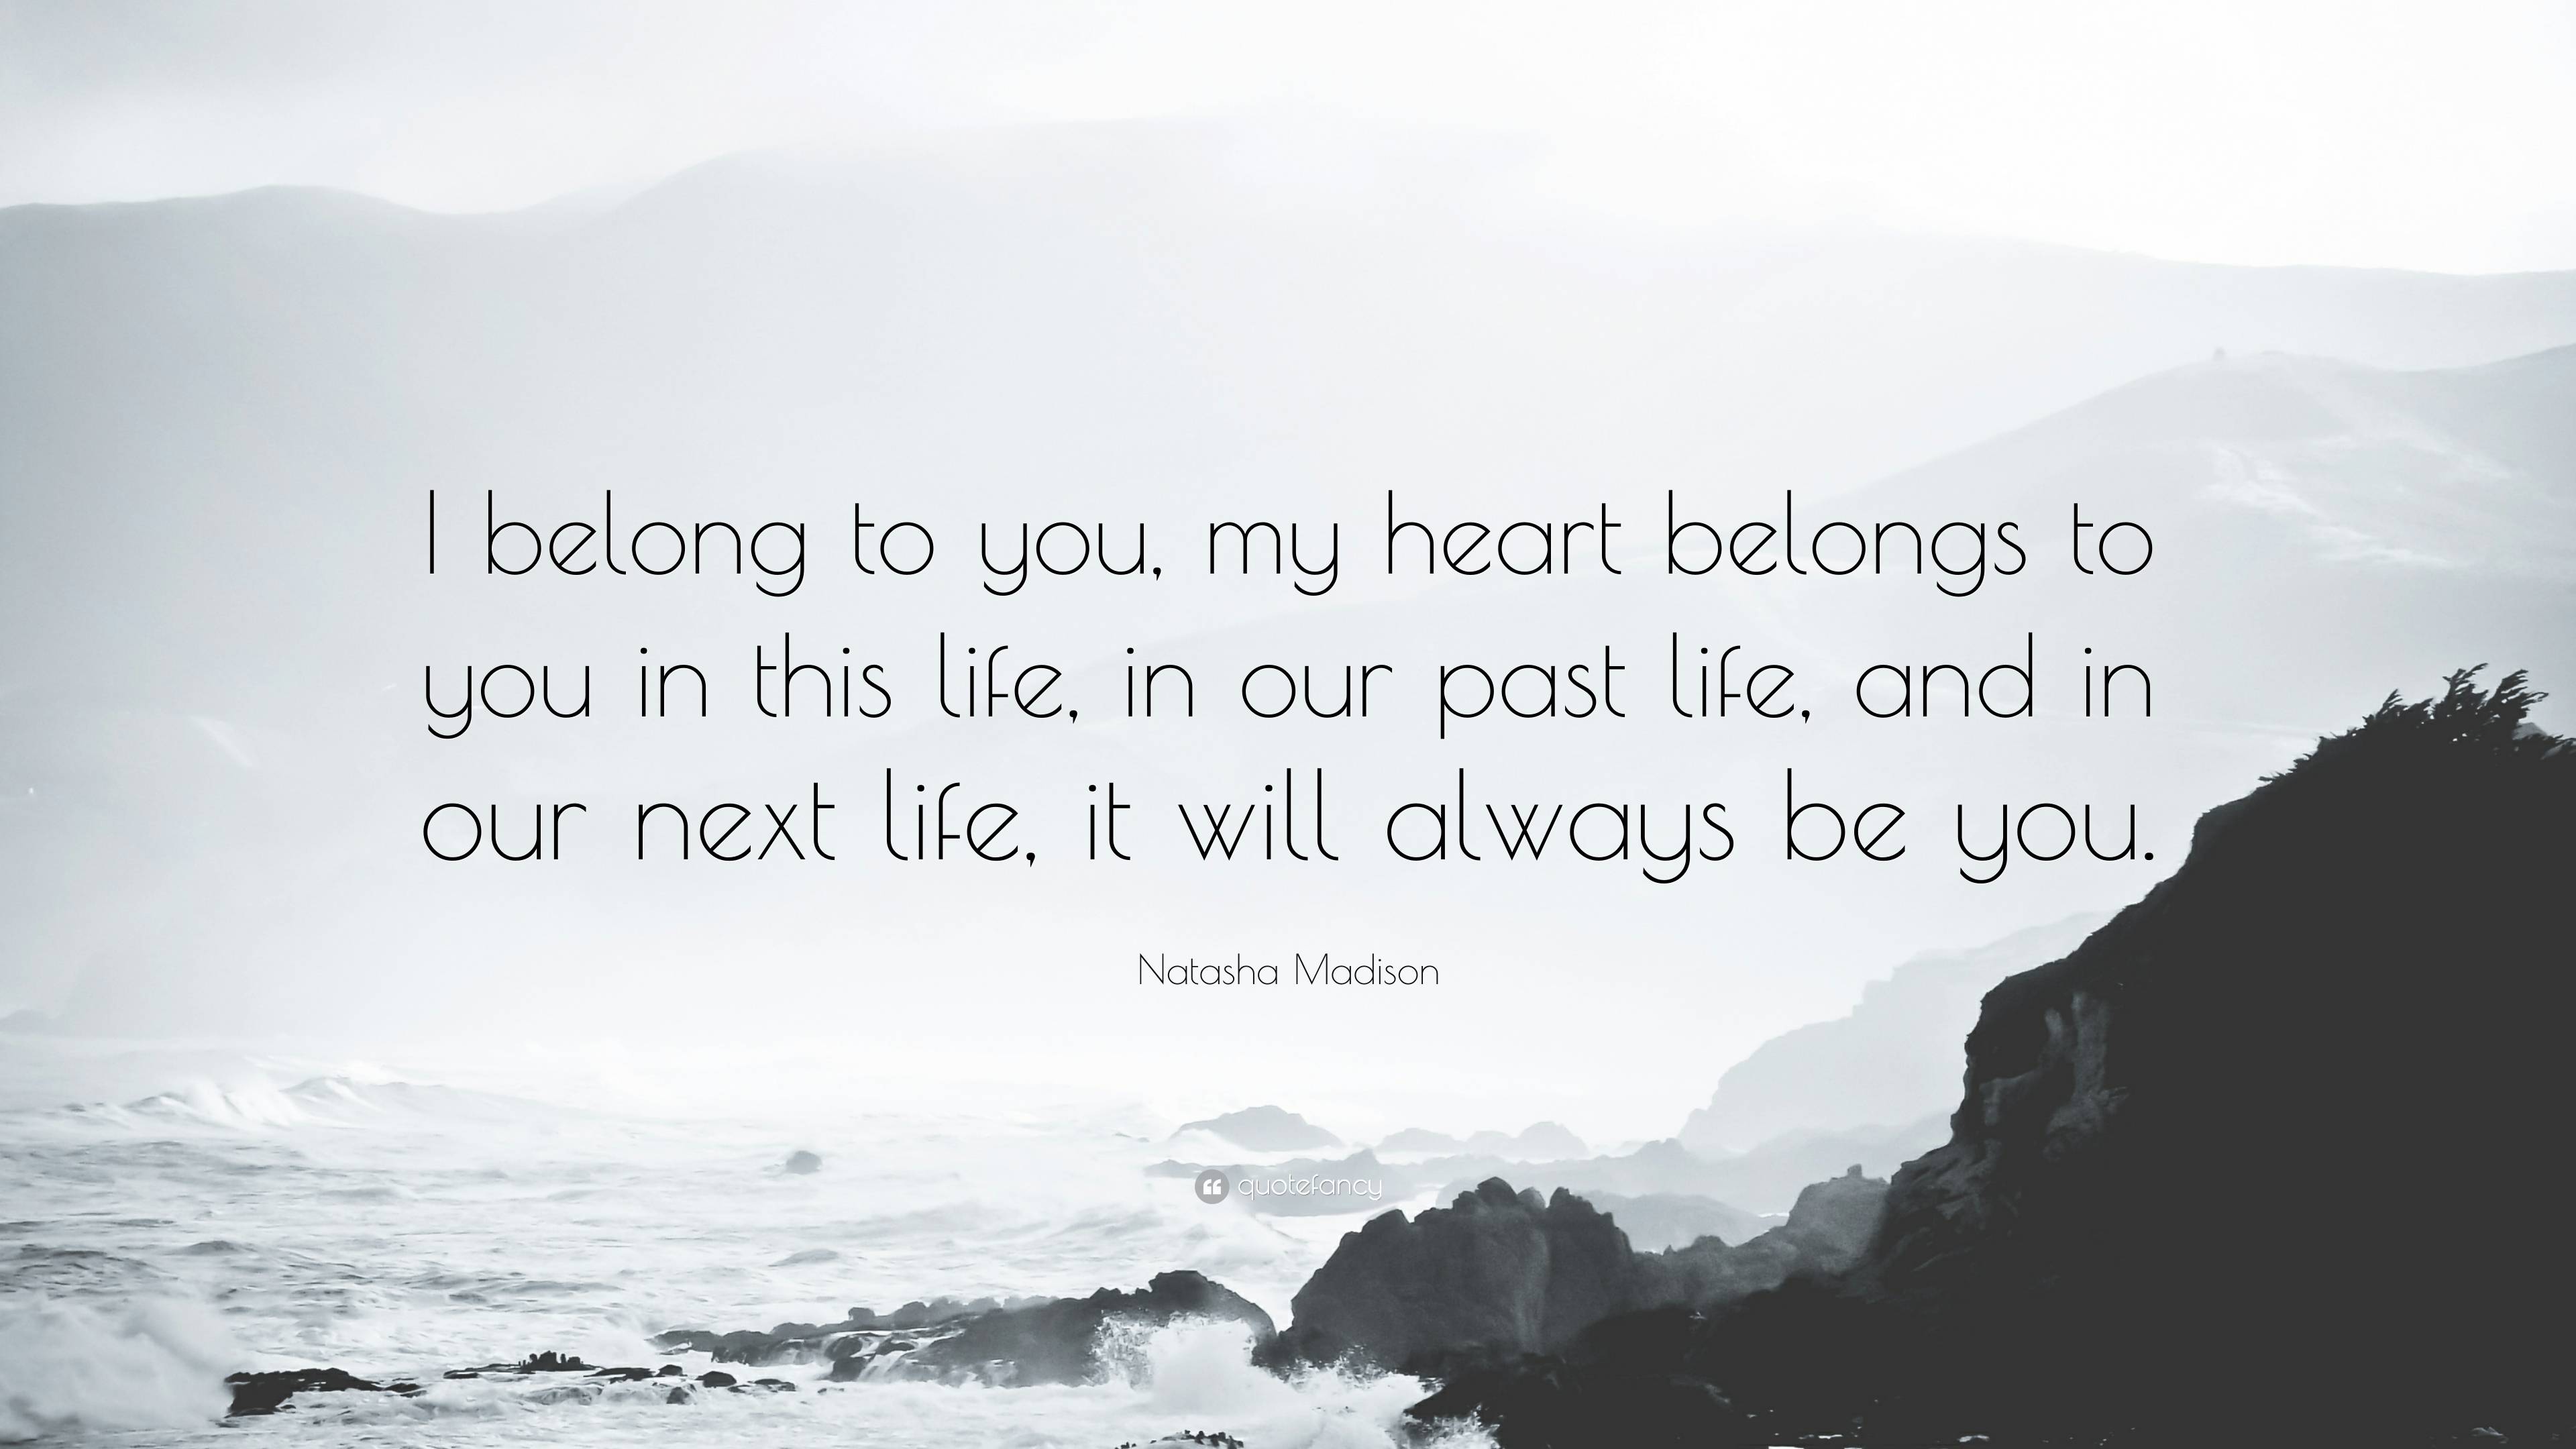 Natasha Madison Quote: “I belong to you, my heart belongs to you in this  life, in